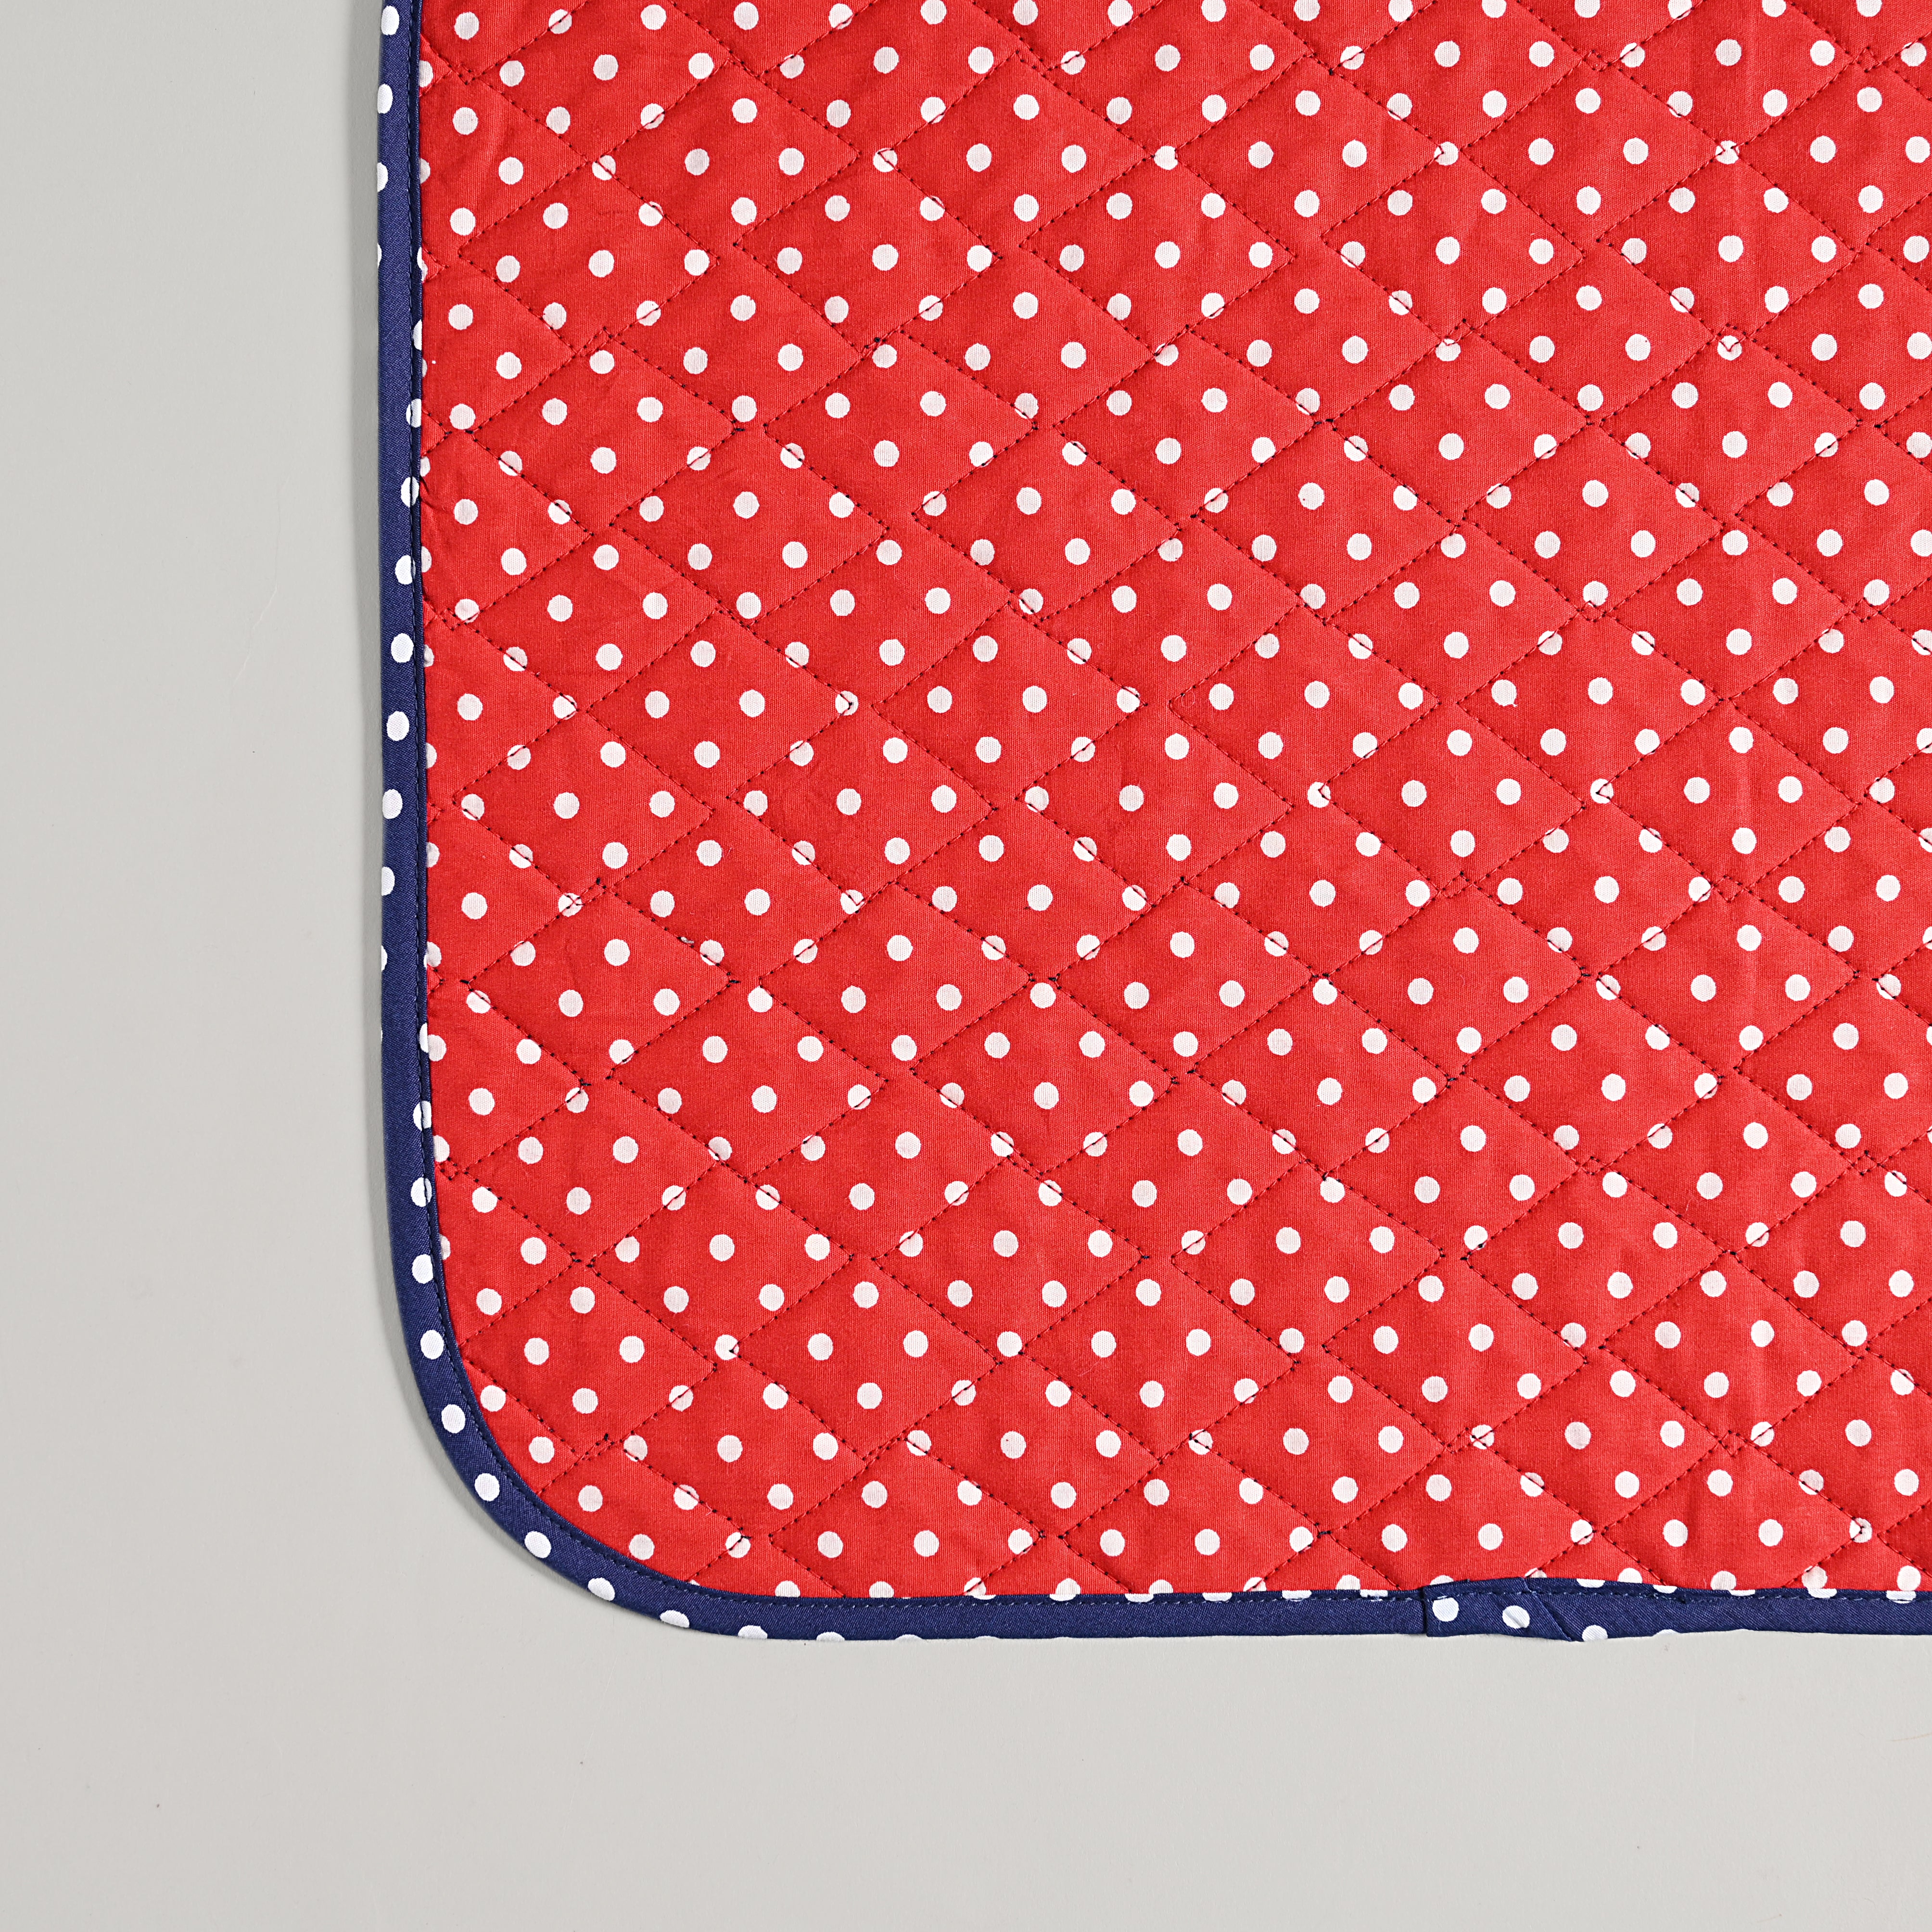 Polka Quilted Placemat 6 Pc Set